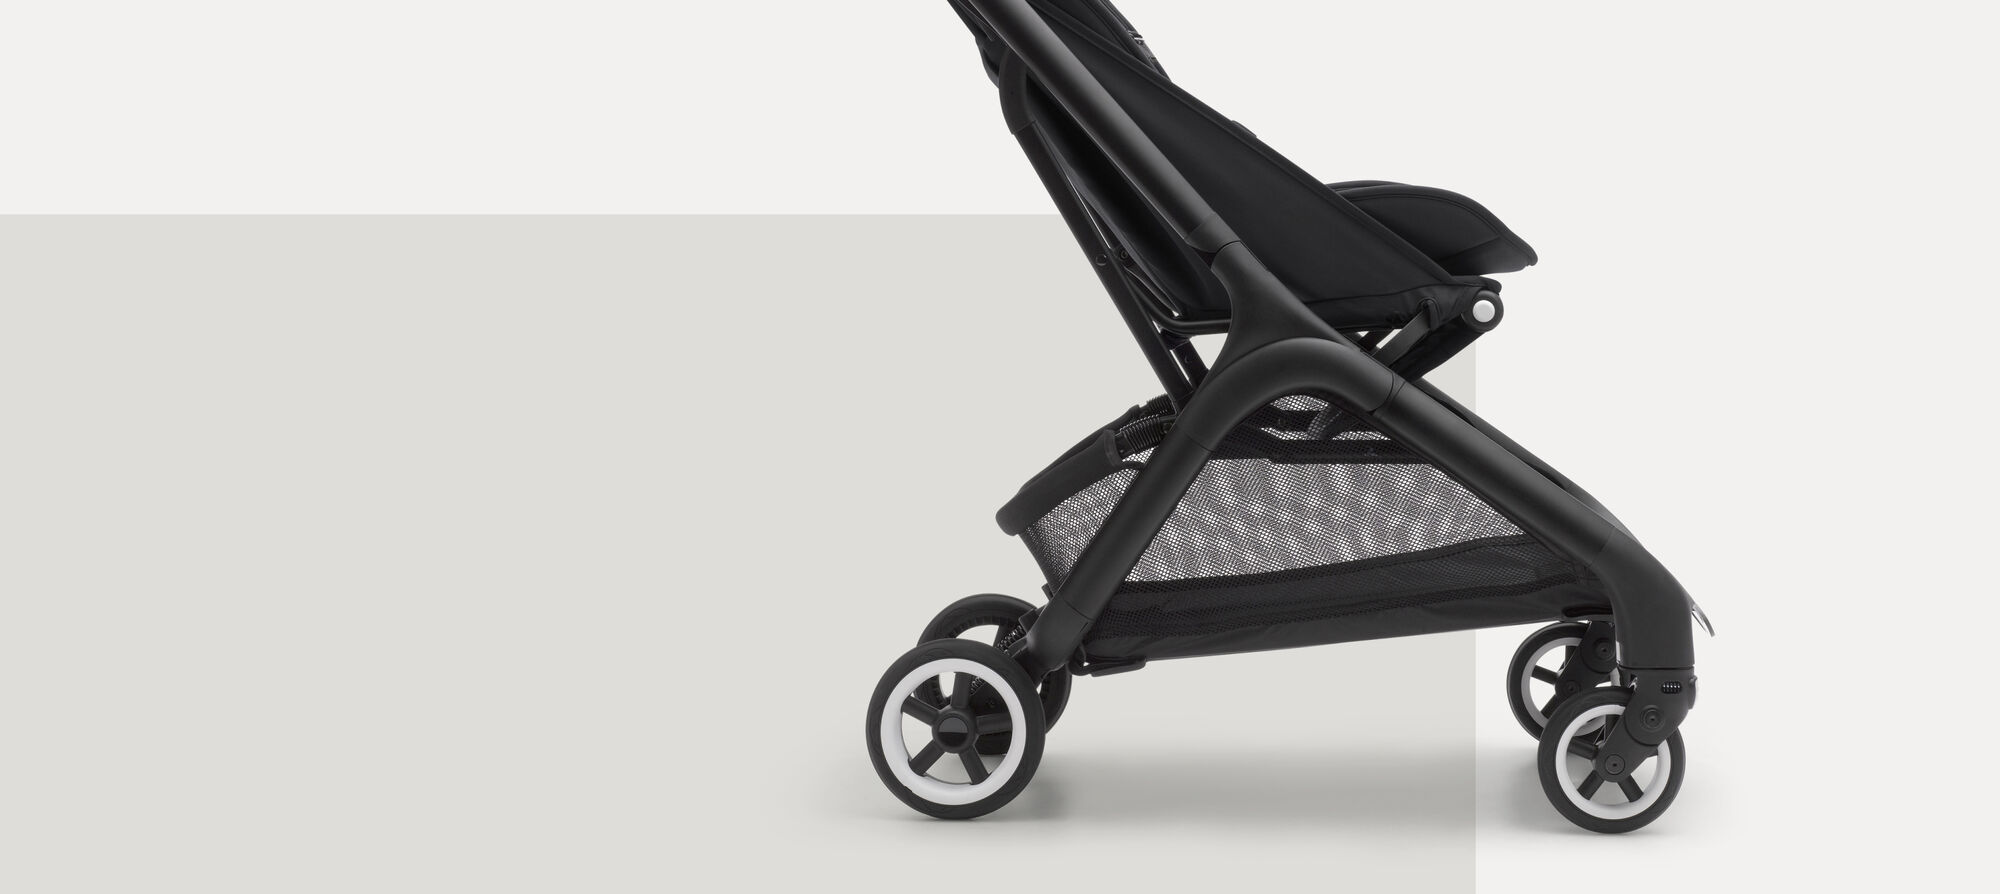 A sideway close-up of the Bugaboo Butterfly compact travel stroller's underseat basket.